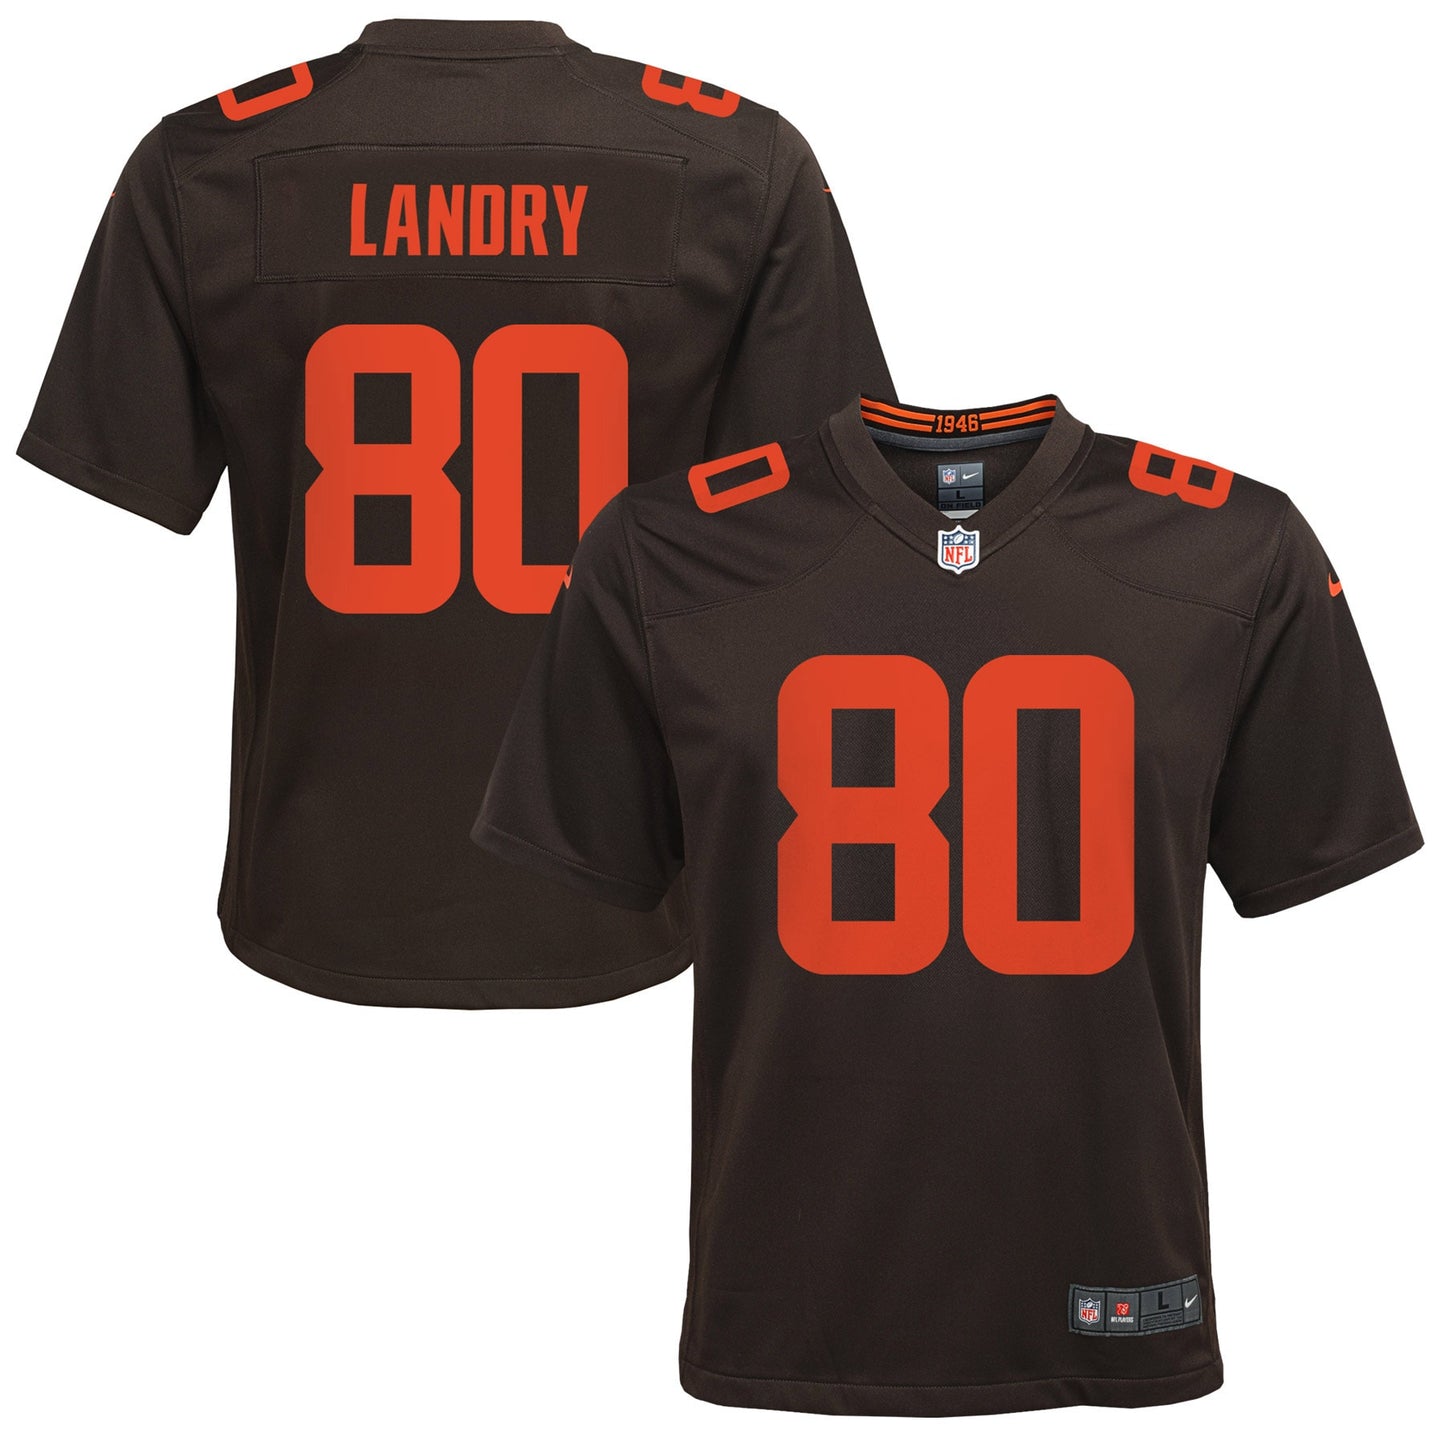 Jarvis Landry Cleveland Browns Nike Youth Alternate Game Jersey - Brown